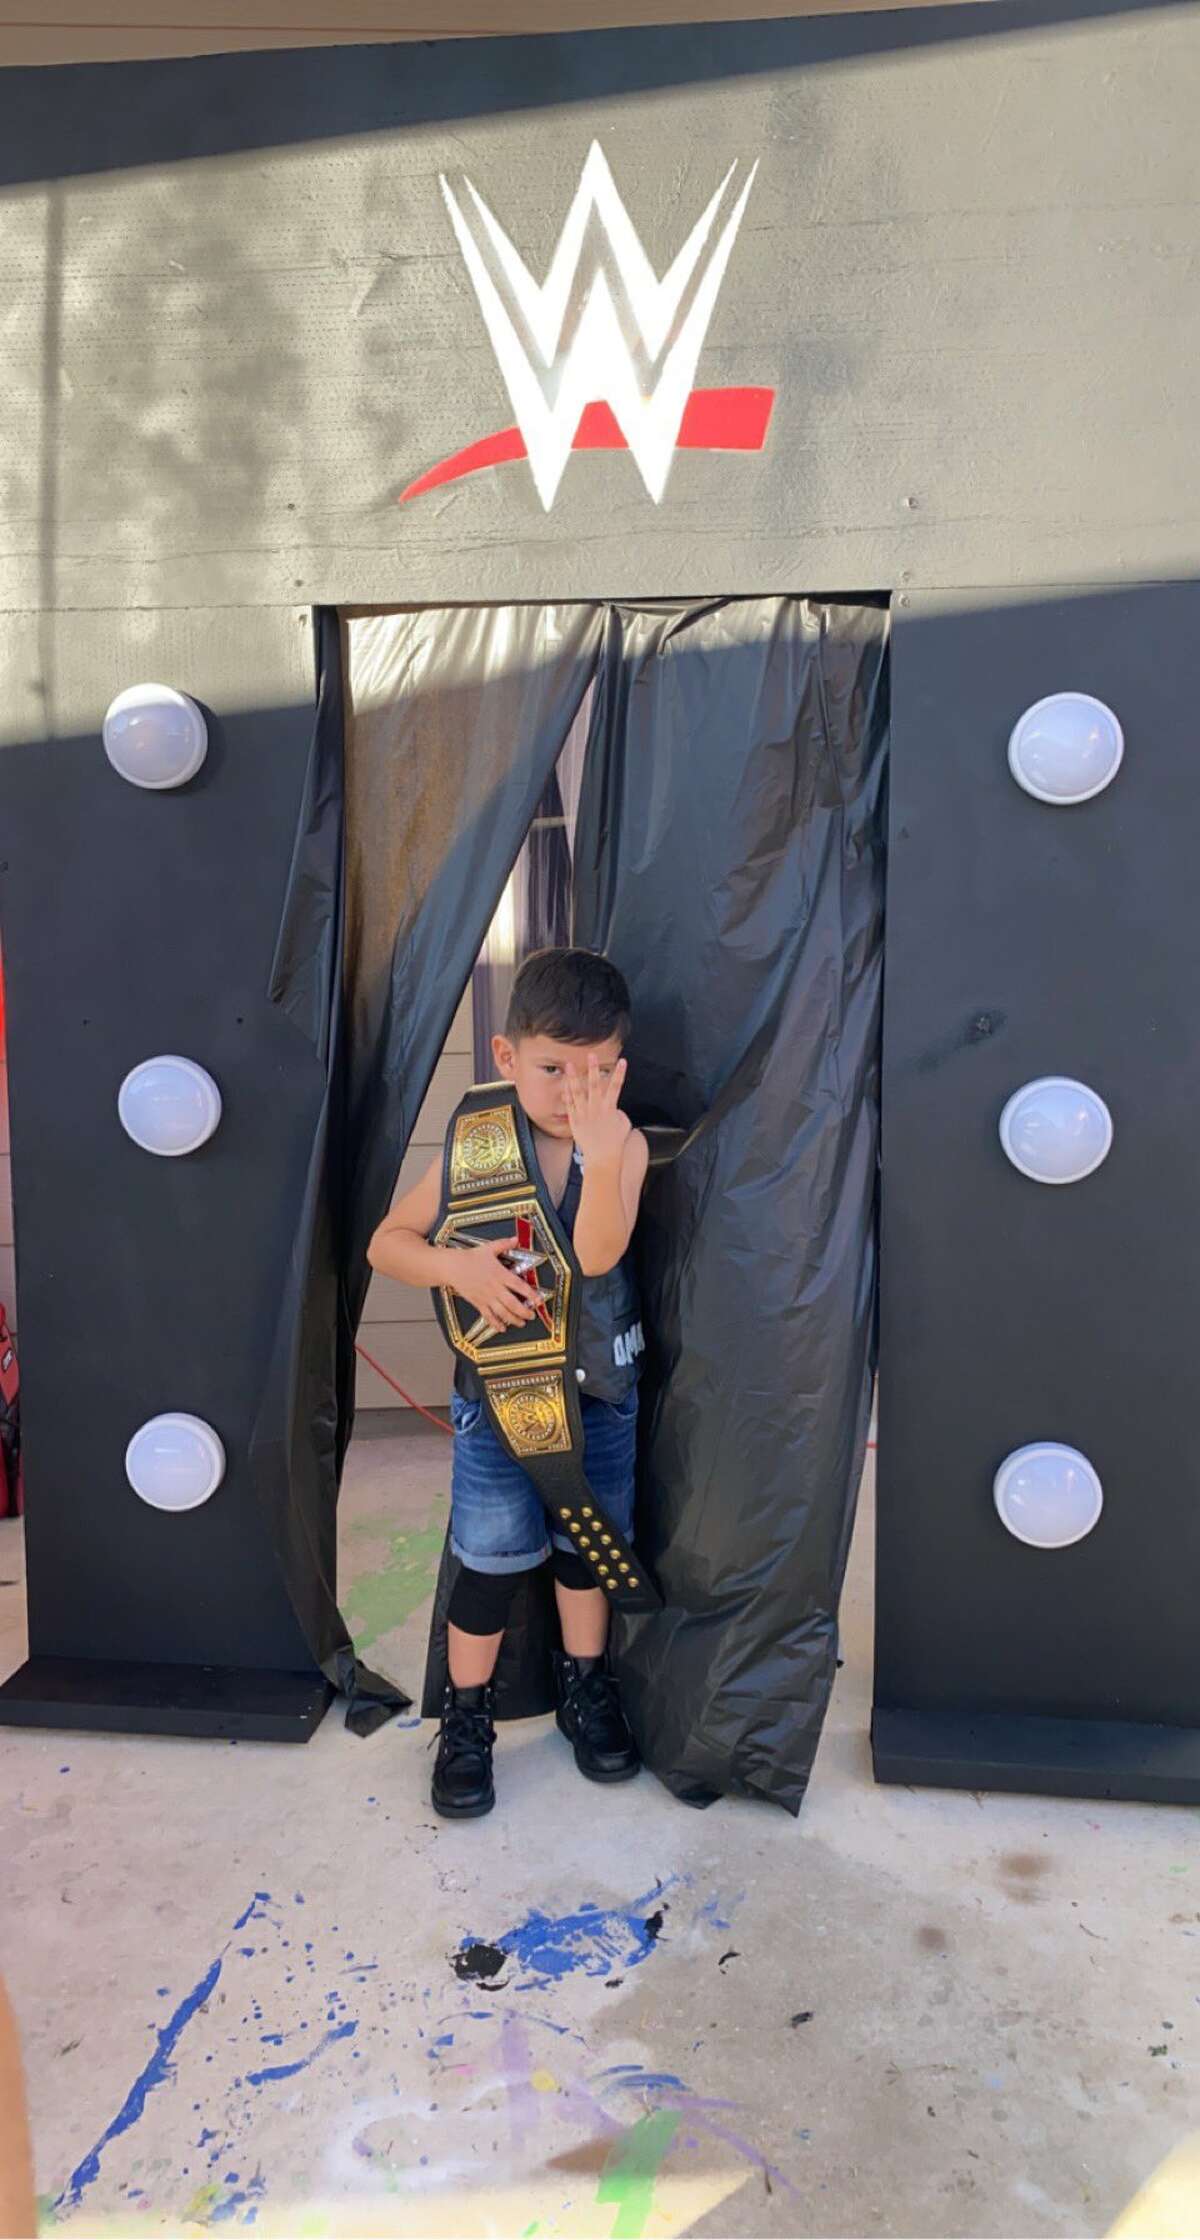 With the iconic blue jean shorts and black skull vest, Mason Casares honored one of his favorite WWE Wrestlers for his fourth birthday: Stone Cold Steve Austin.